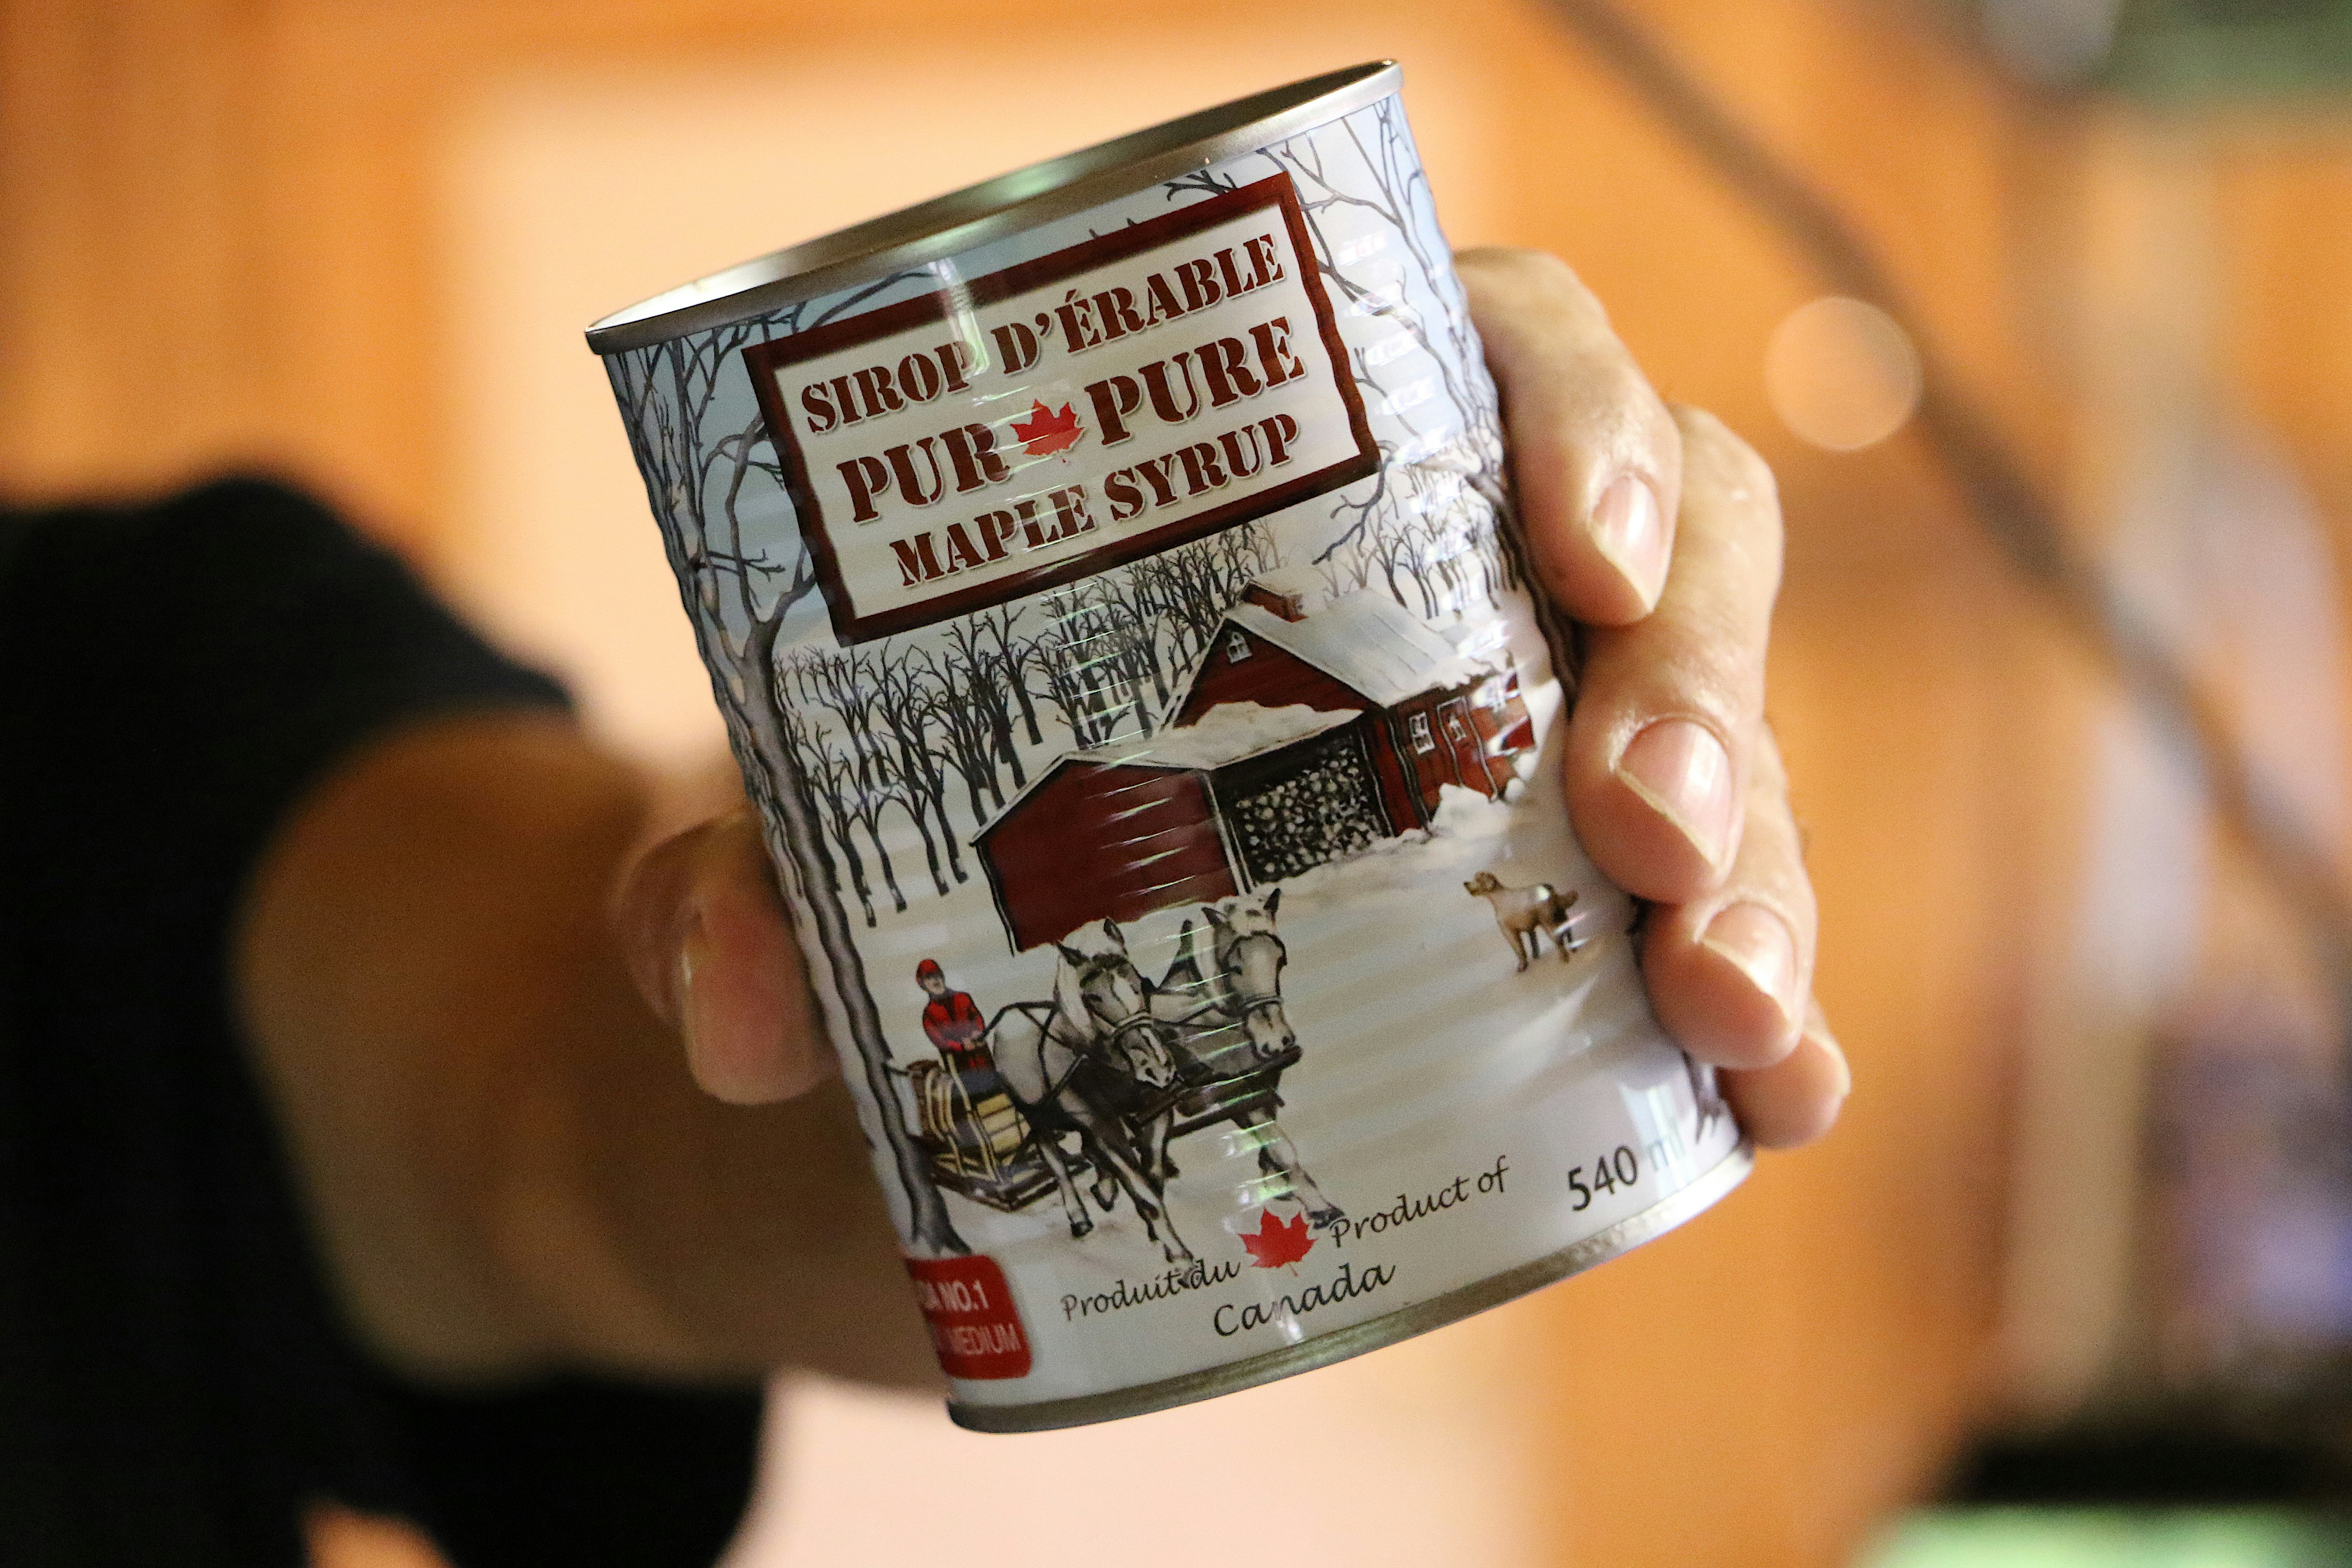 A can of pure maple syrup from Quebec